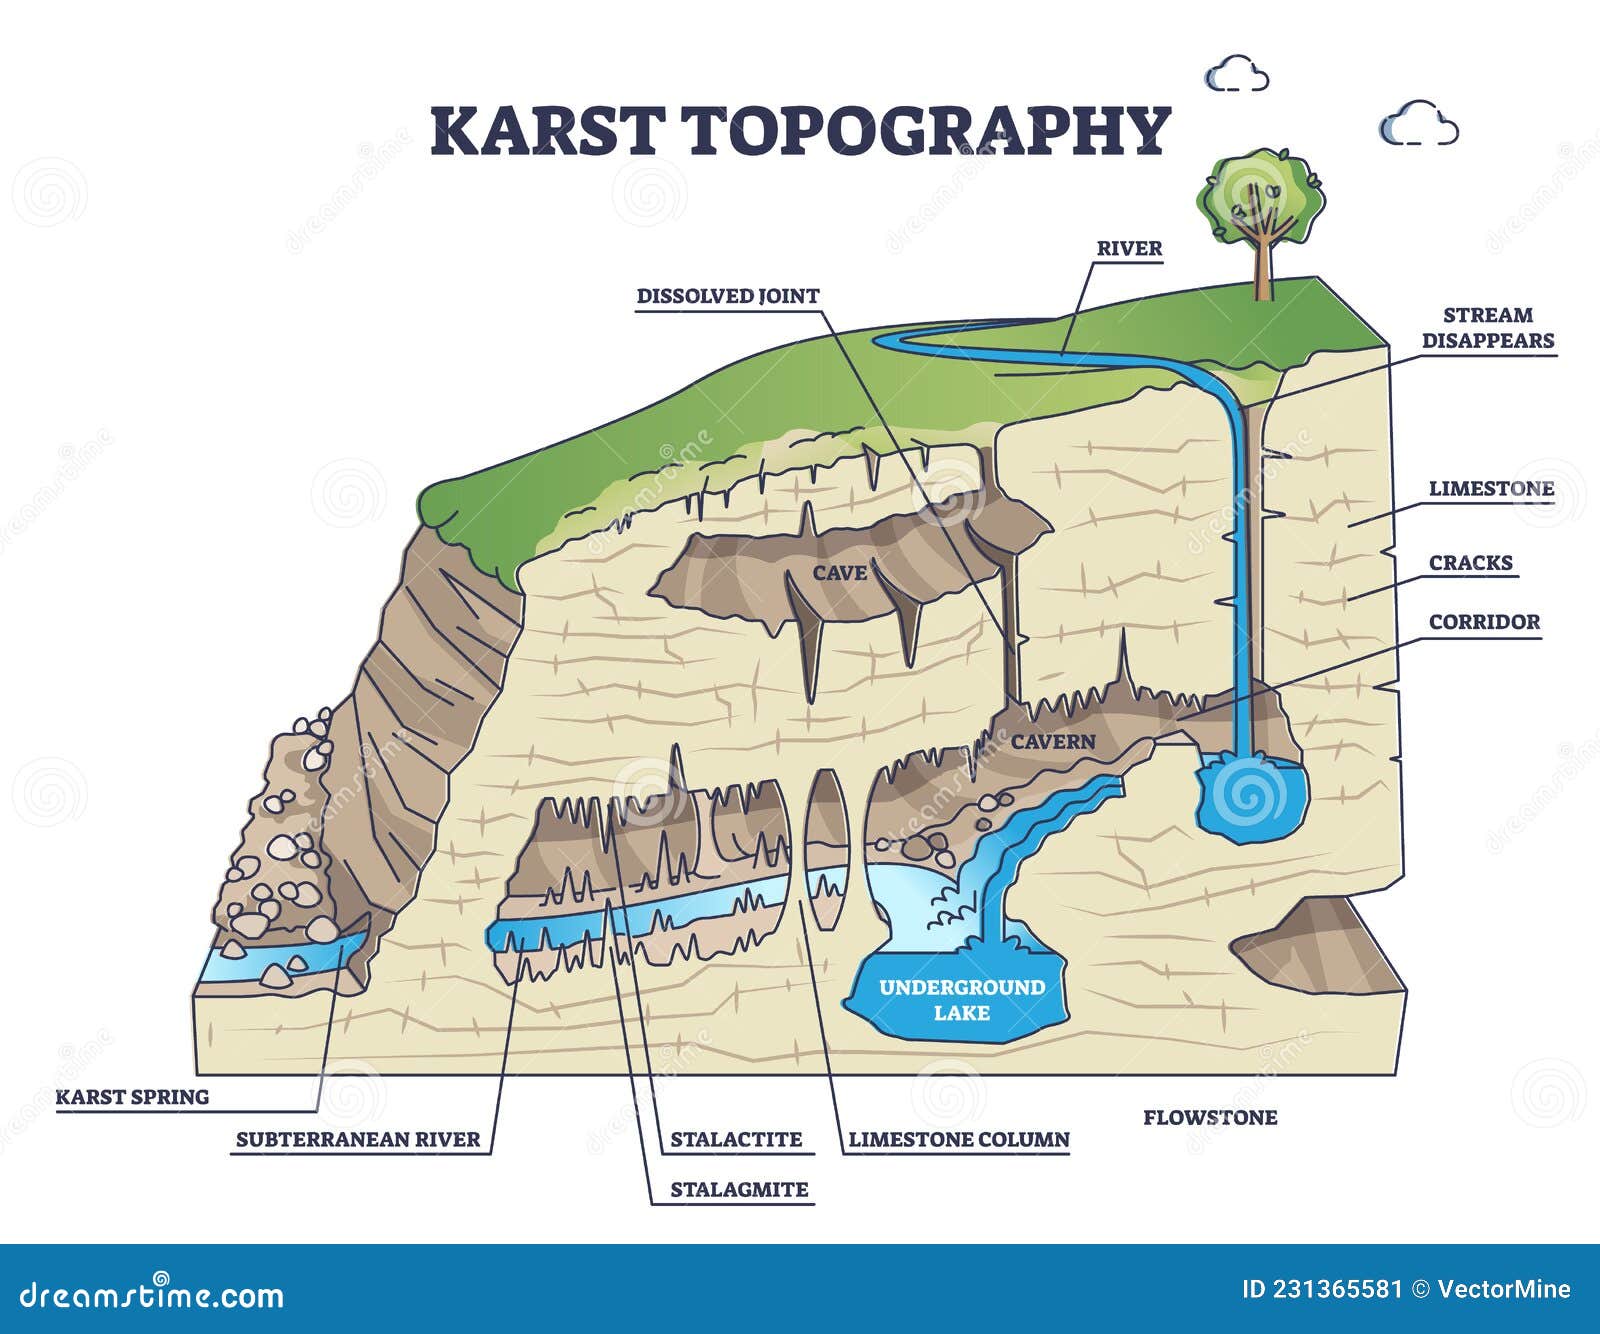 karst topography and geological underground cave formation outline diagram